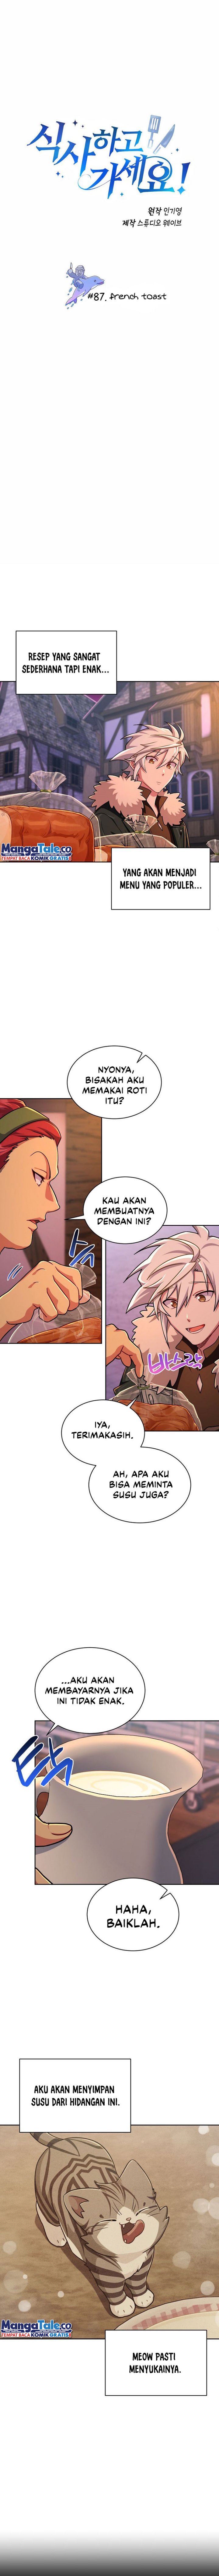 Please Have A Meal Chapter 87